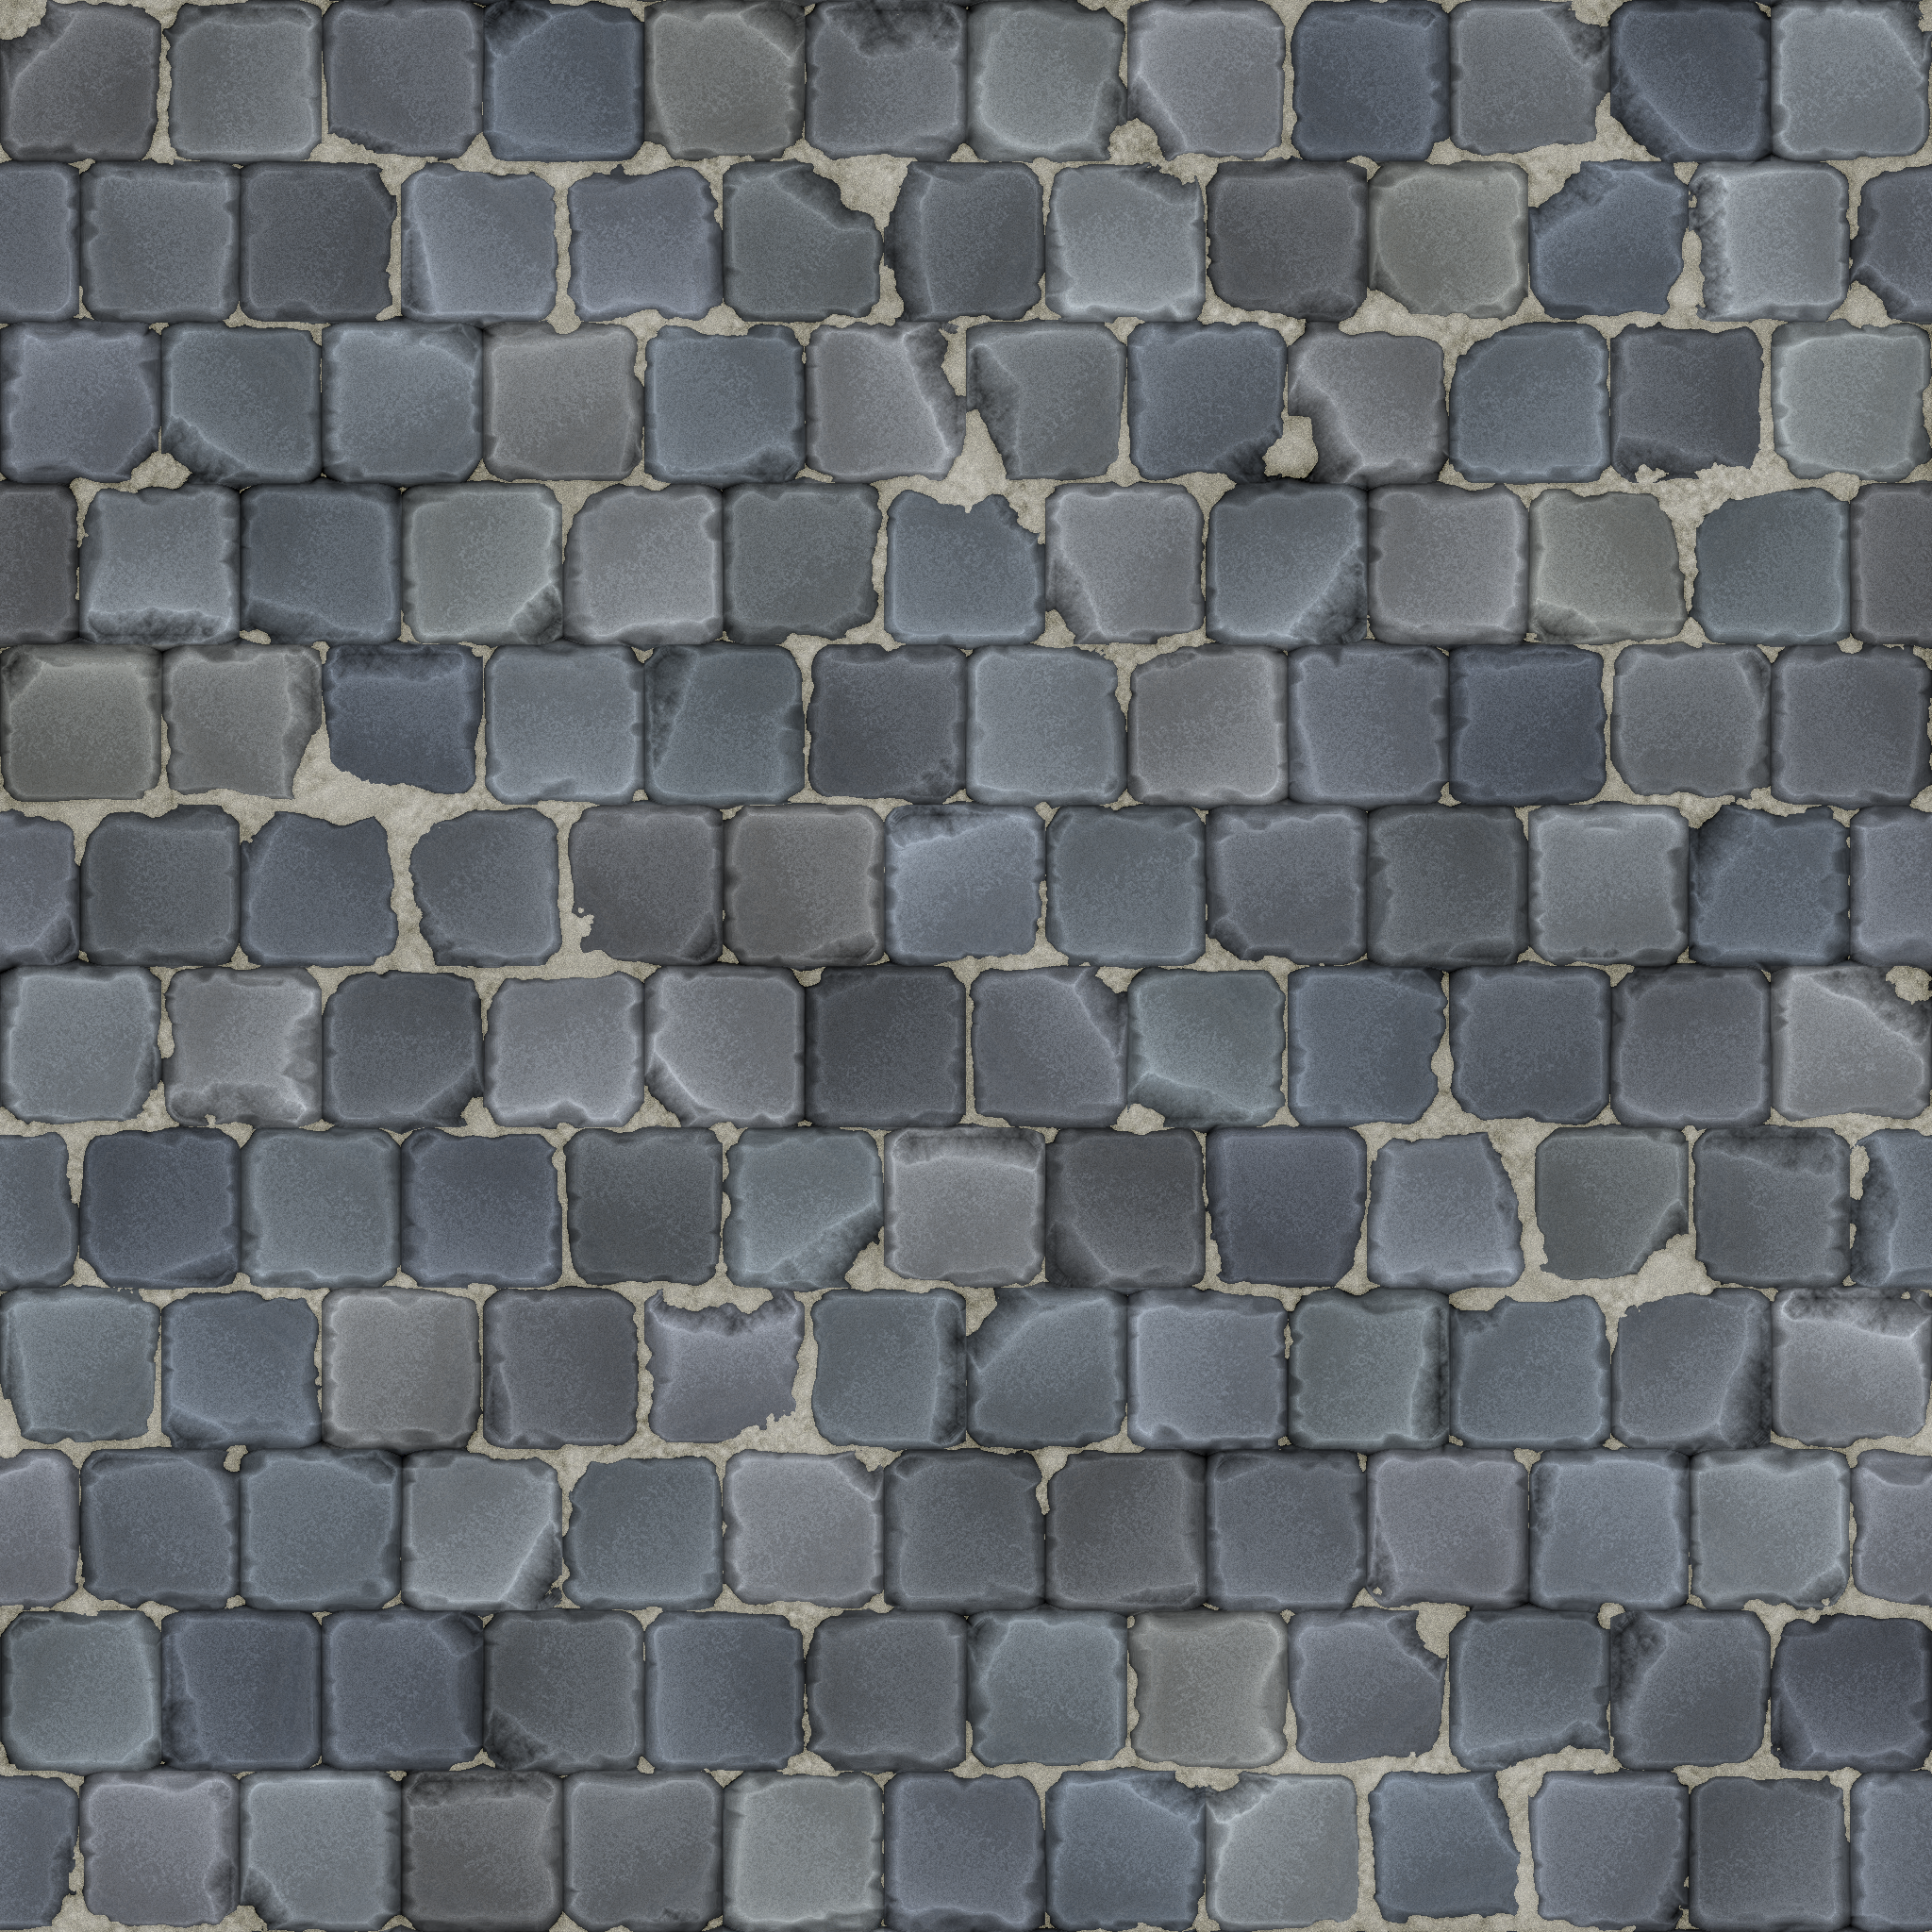 This is a free seamless tiling Stylized Cobblestone Texture I created using...